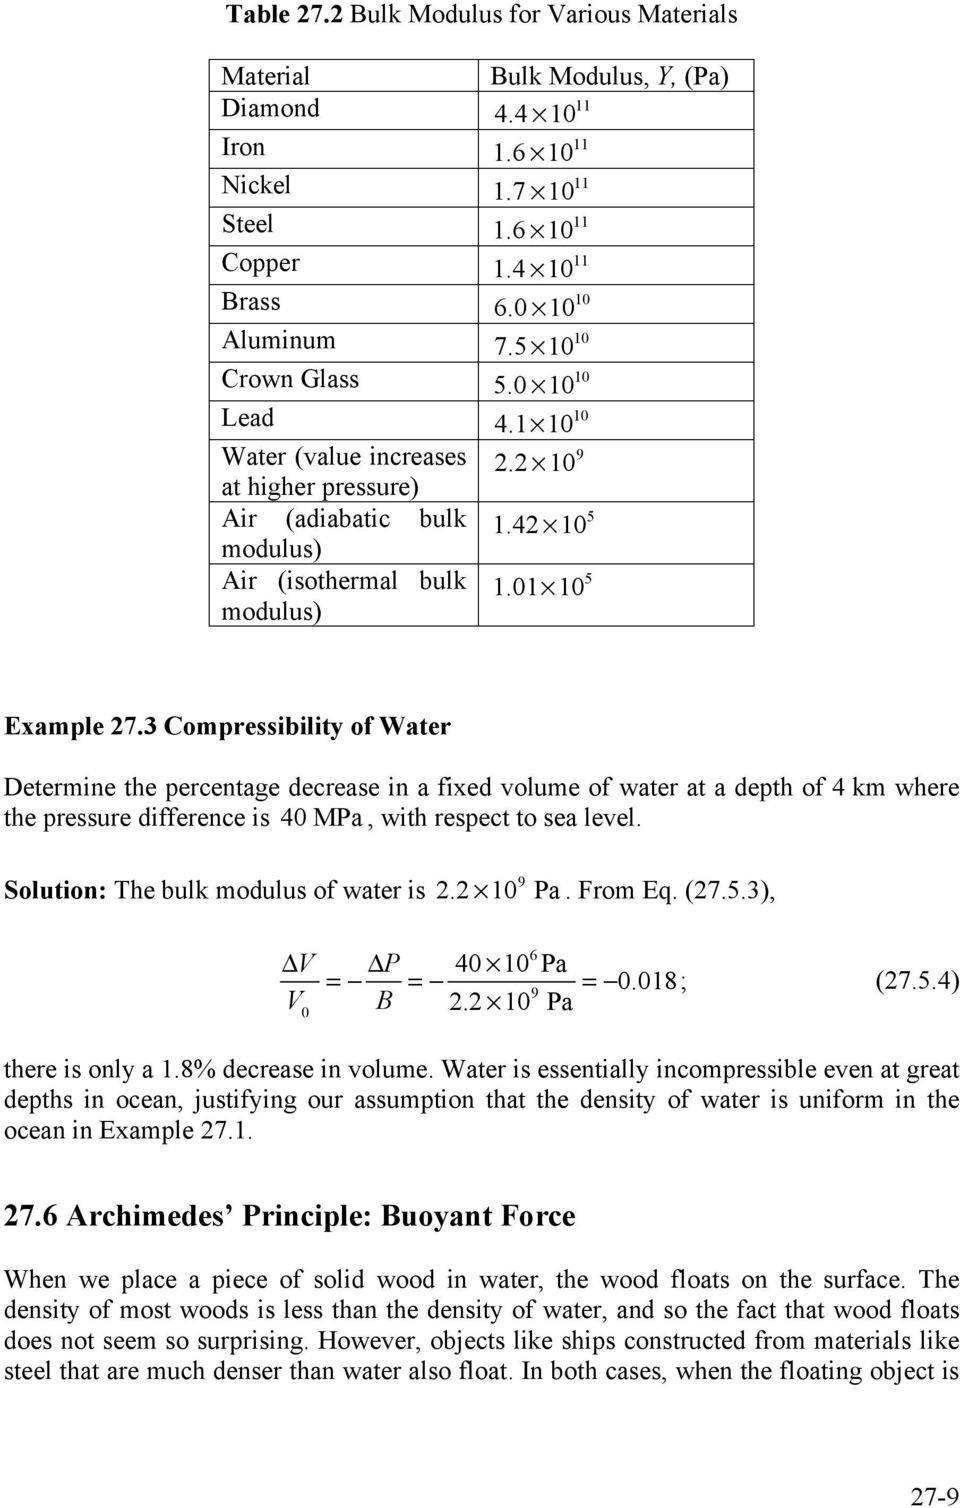 3 Compressibility of Water Determine the percentage decrease in a fixed volume of water at a depth of 4 km where the pressure difference is 40 MPa, with respect to sea level.